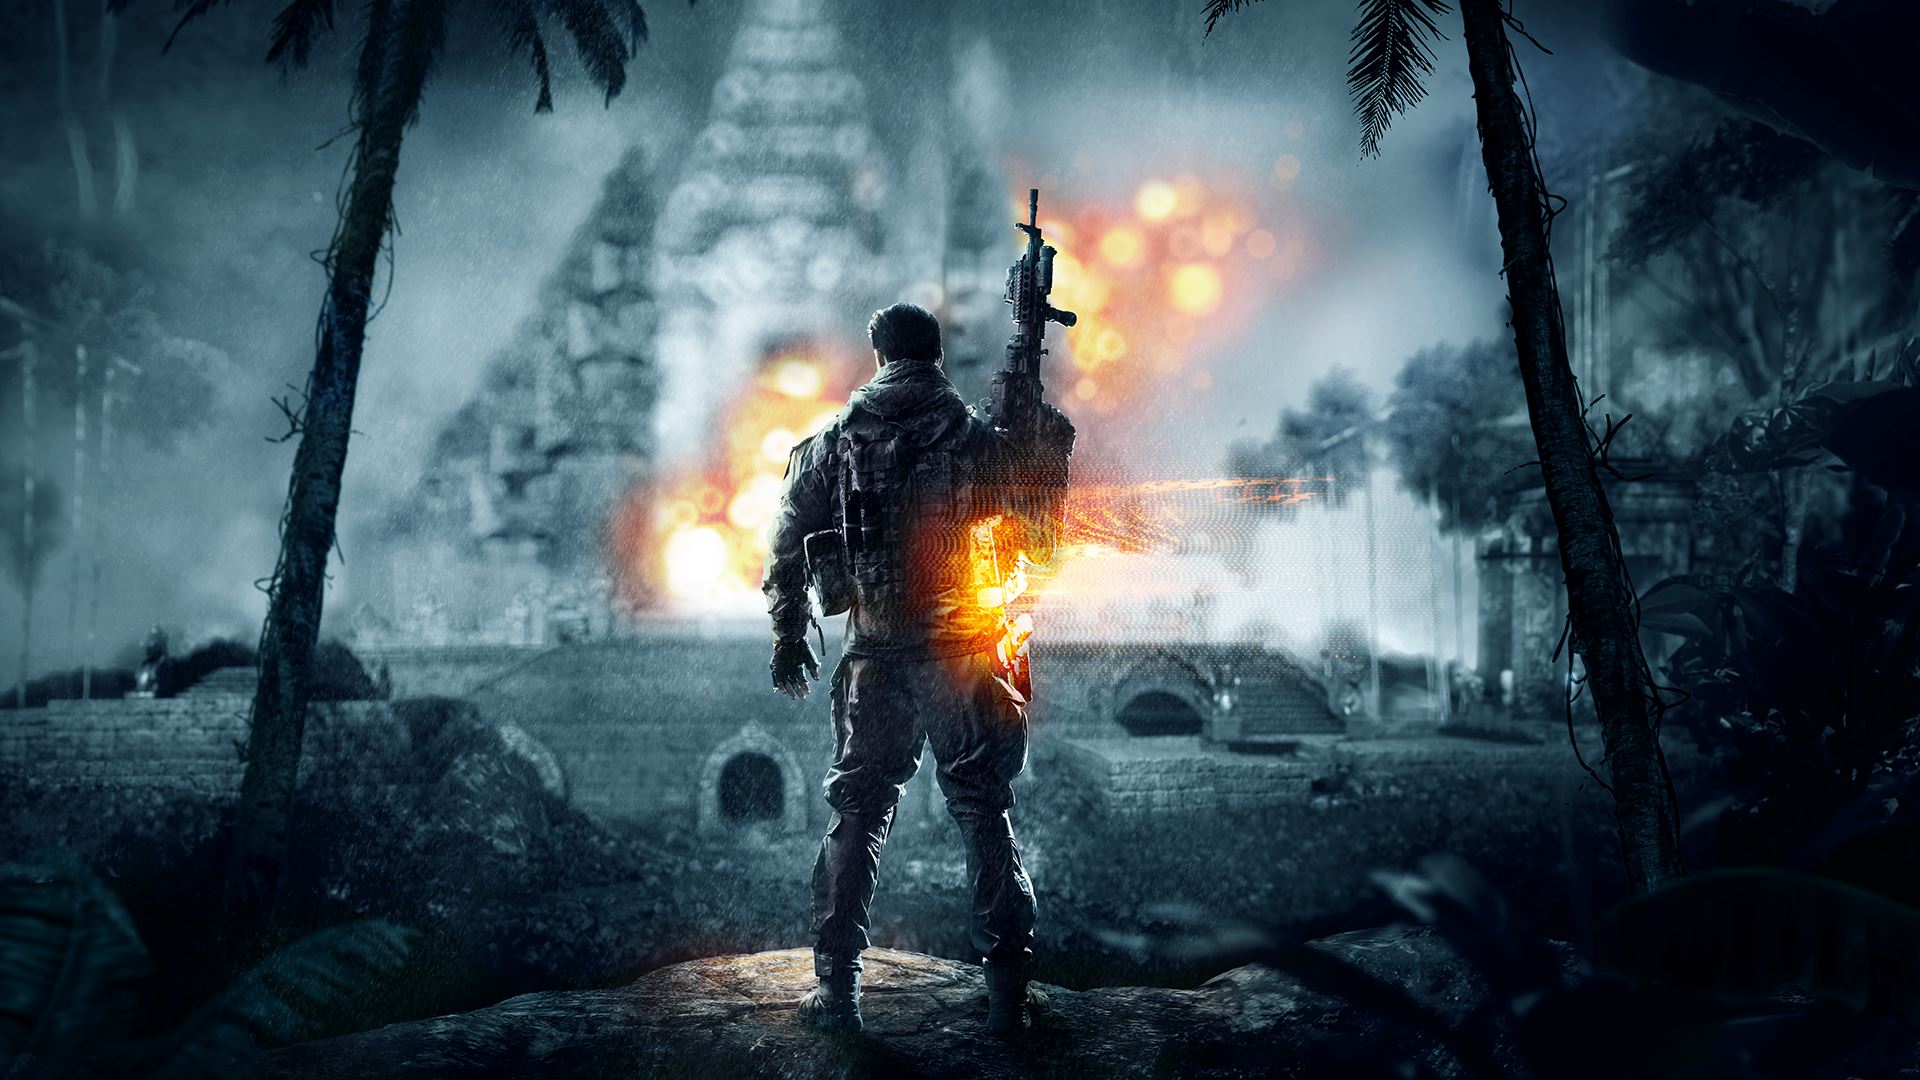 Wallpapers Tagged With BATTLEFIELD | BATTLEFIELD HD Wallpapers ...